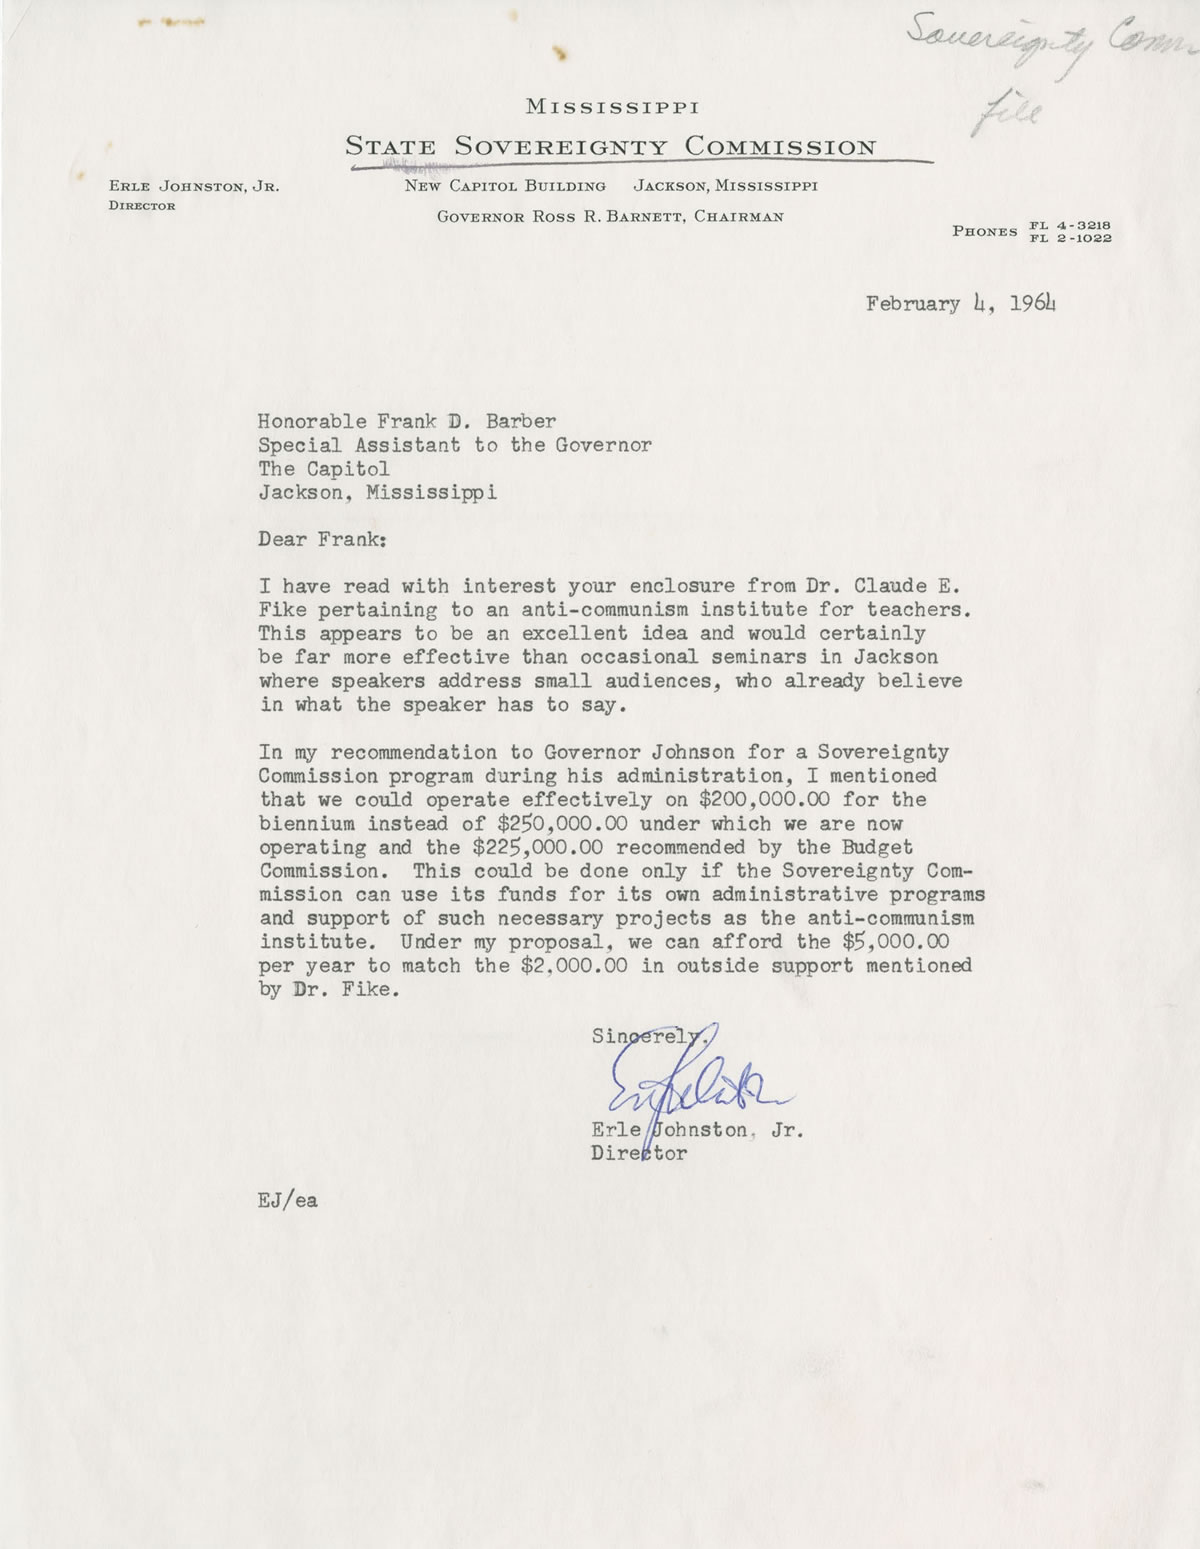 Mississippi State Sovereignty Commission letter about a proposed anti-communism institute for teachers